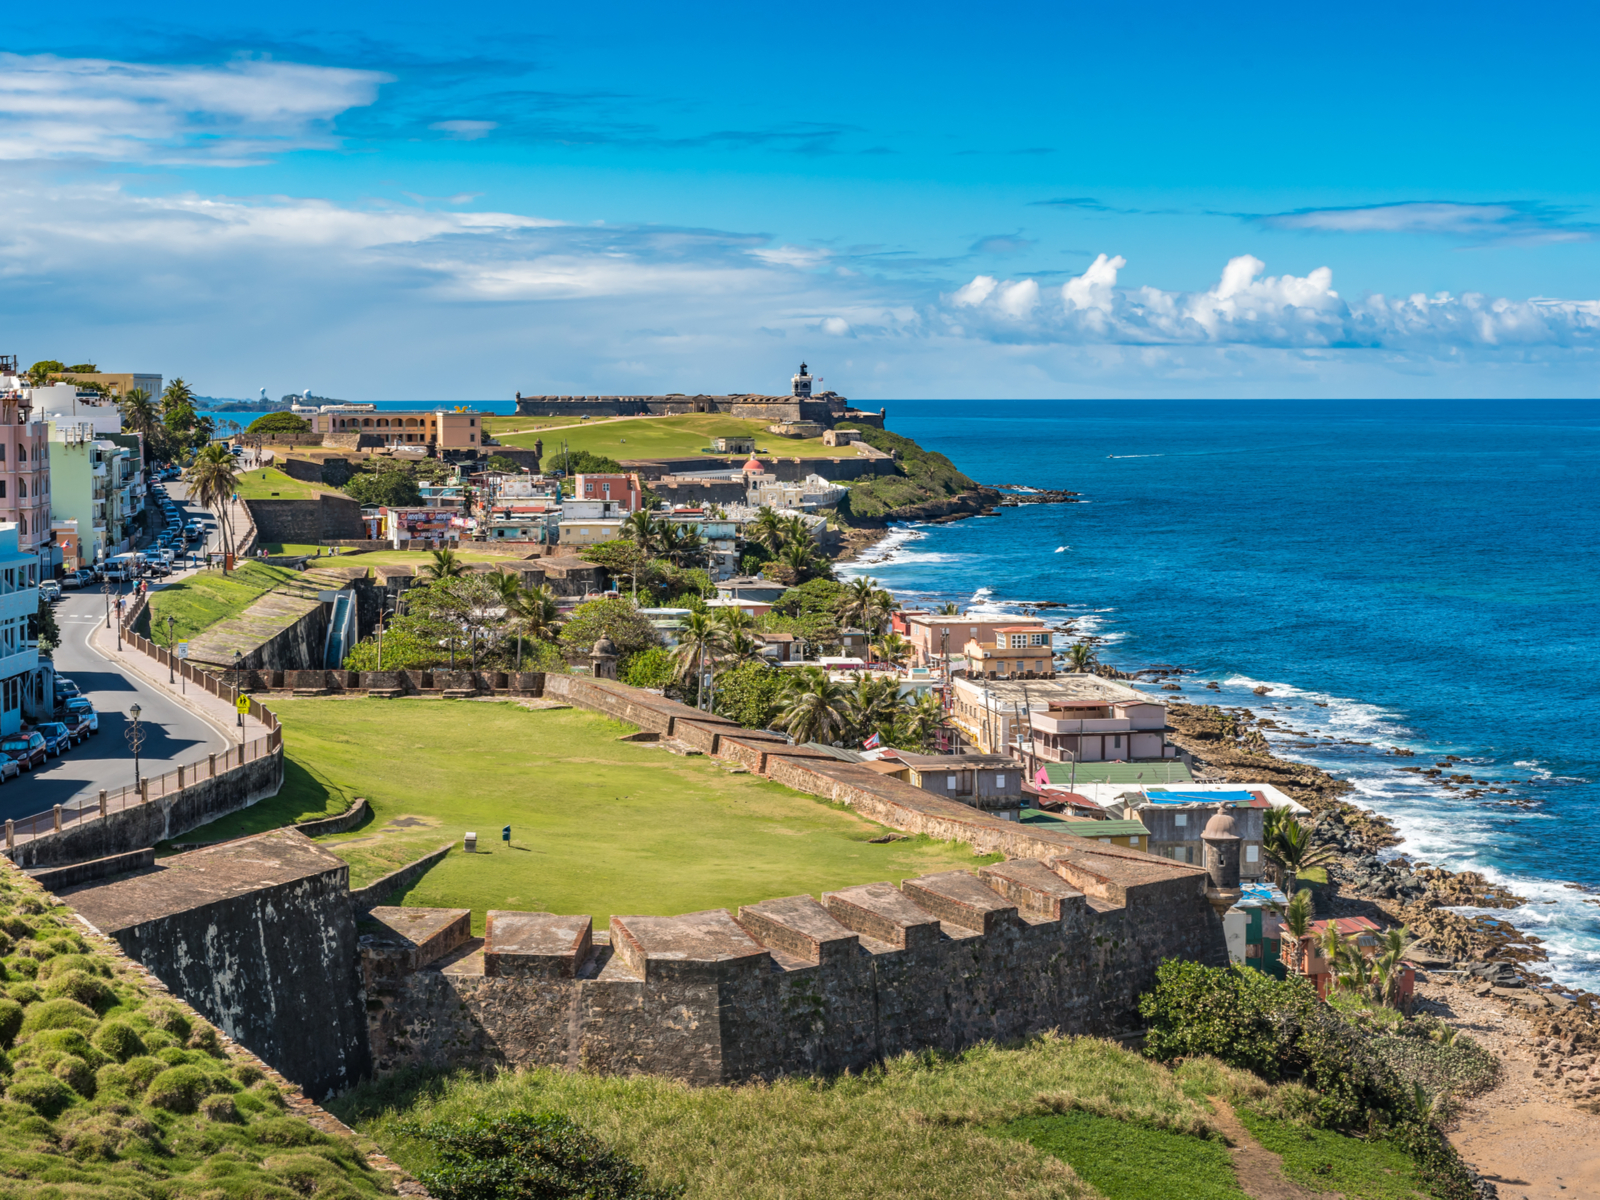 Cool view of the ocean and Castillo de San Cristobal as viewed from a lookout point for a piece on the best hotels in Puerto Rico